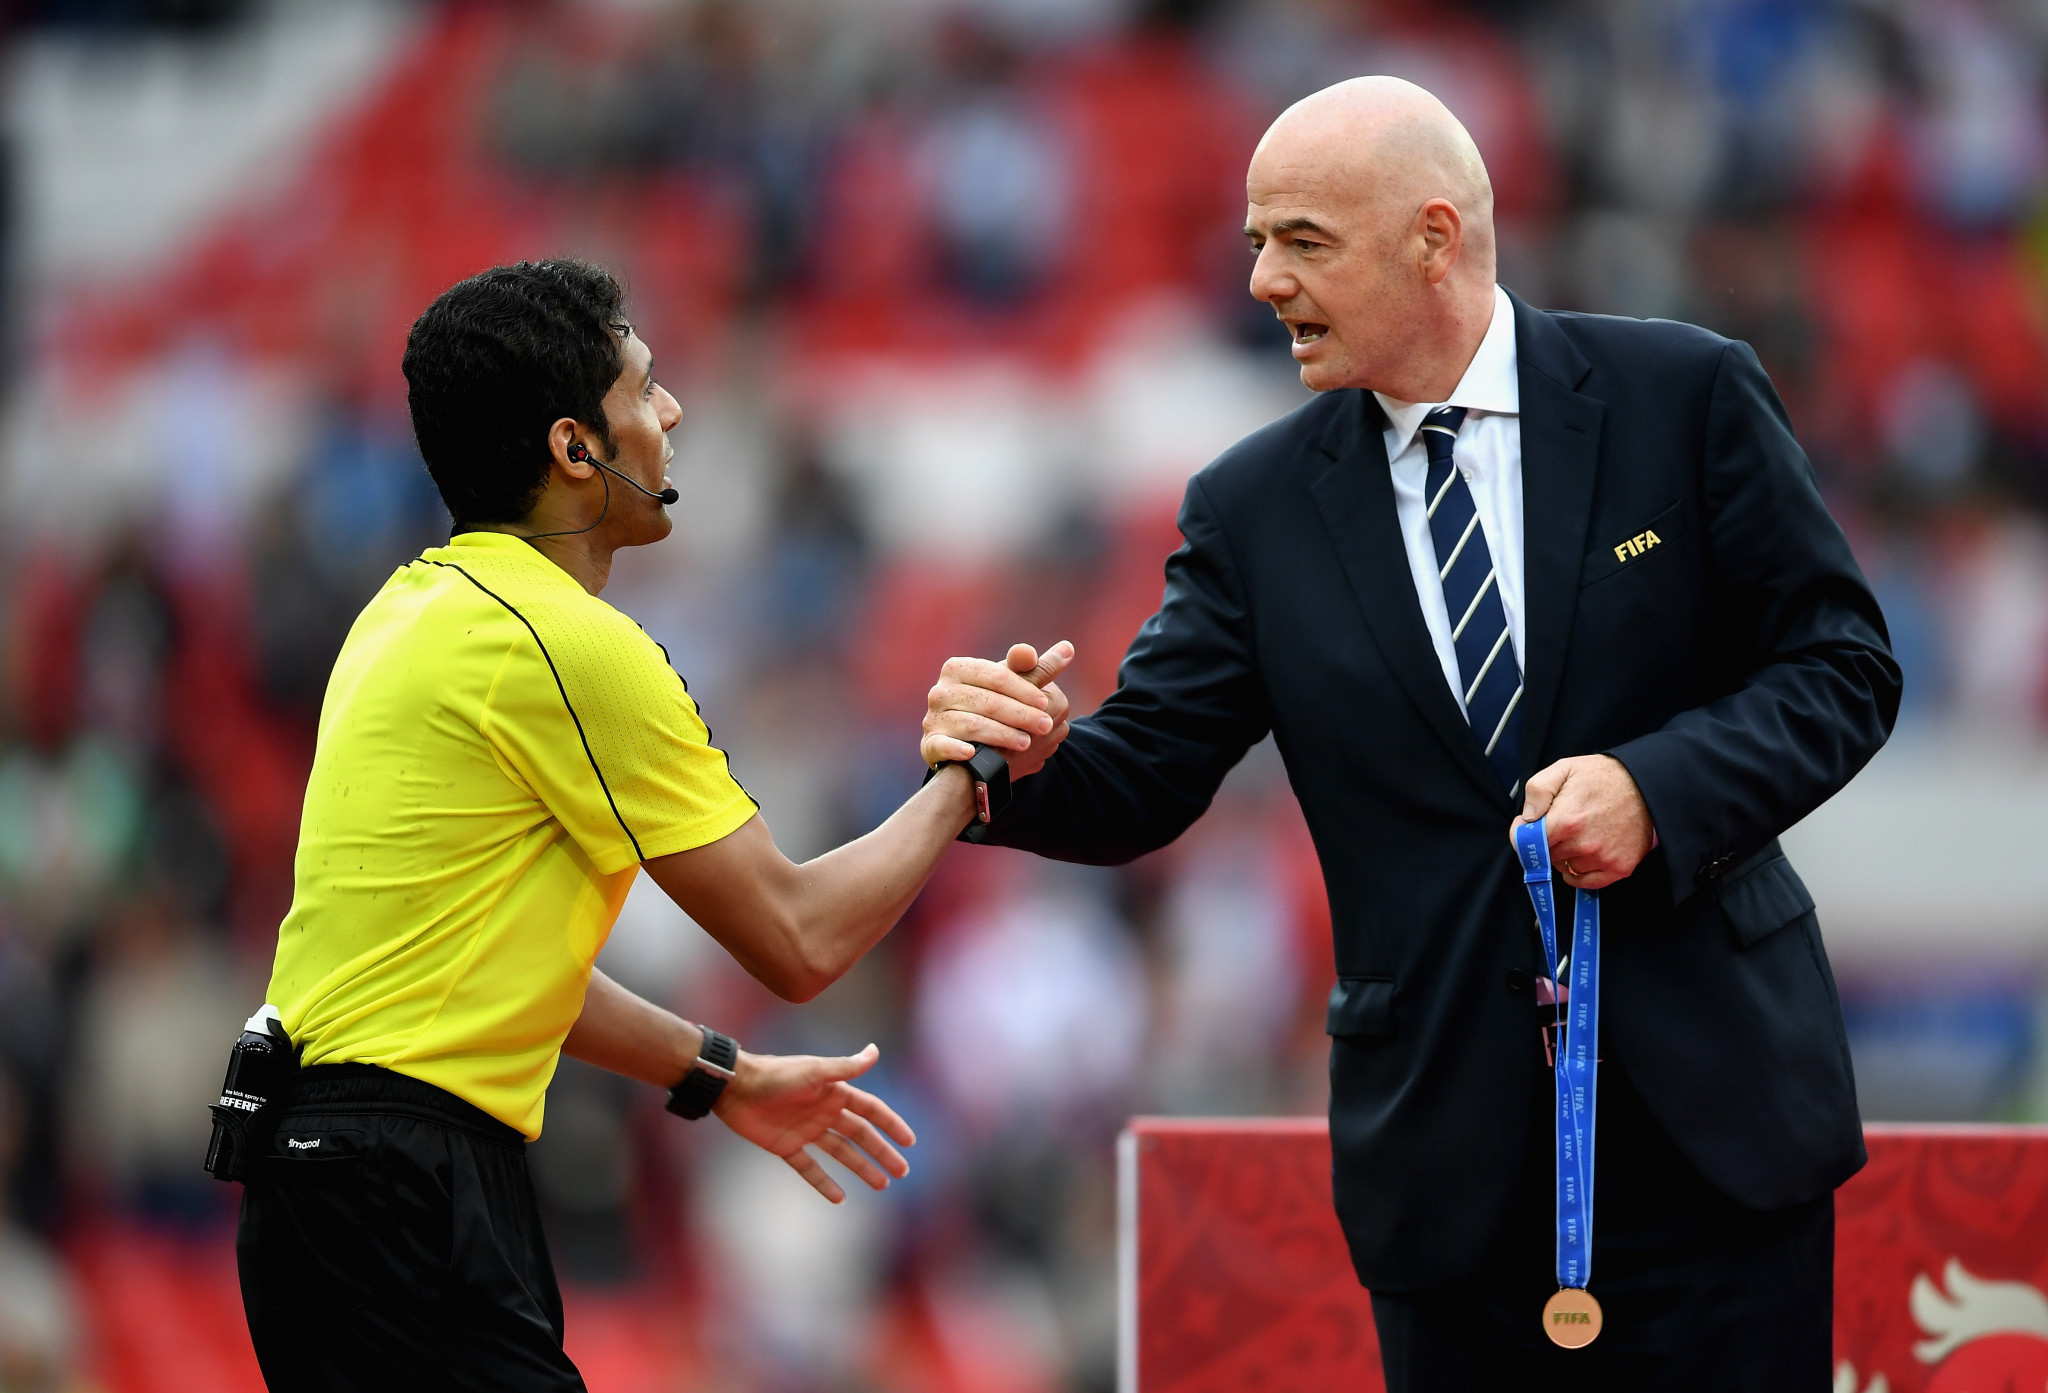 Saudi Arabian World Cup referee Al-Mirdasi banned for life following match-fixing attempt